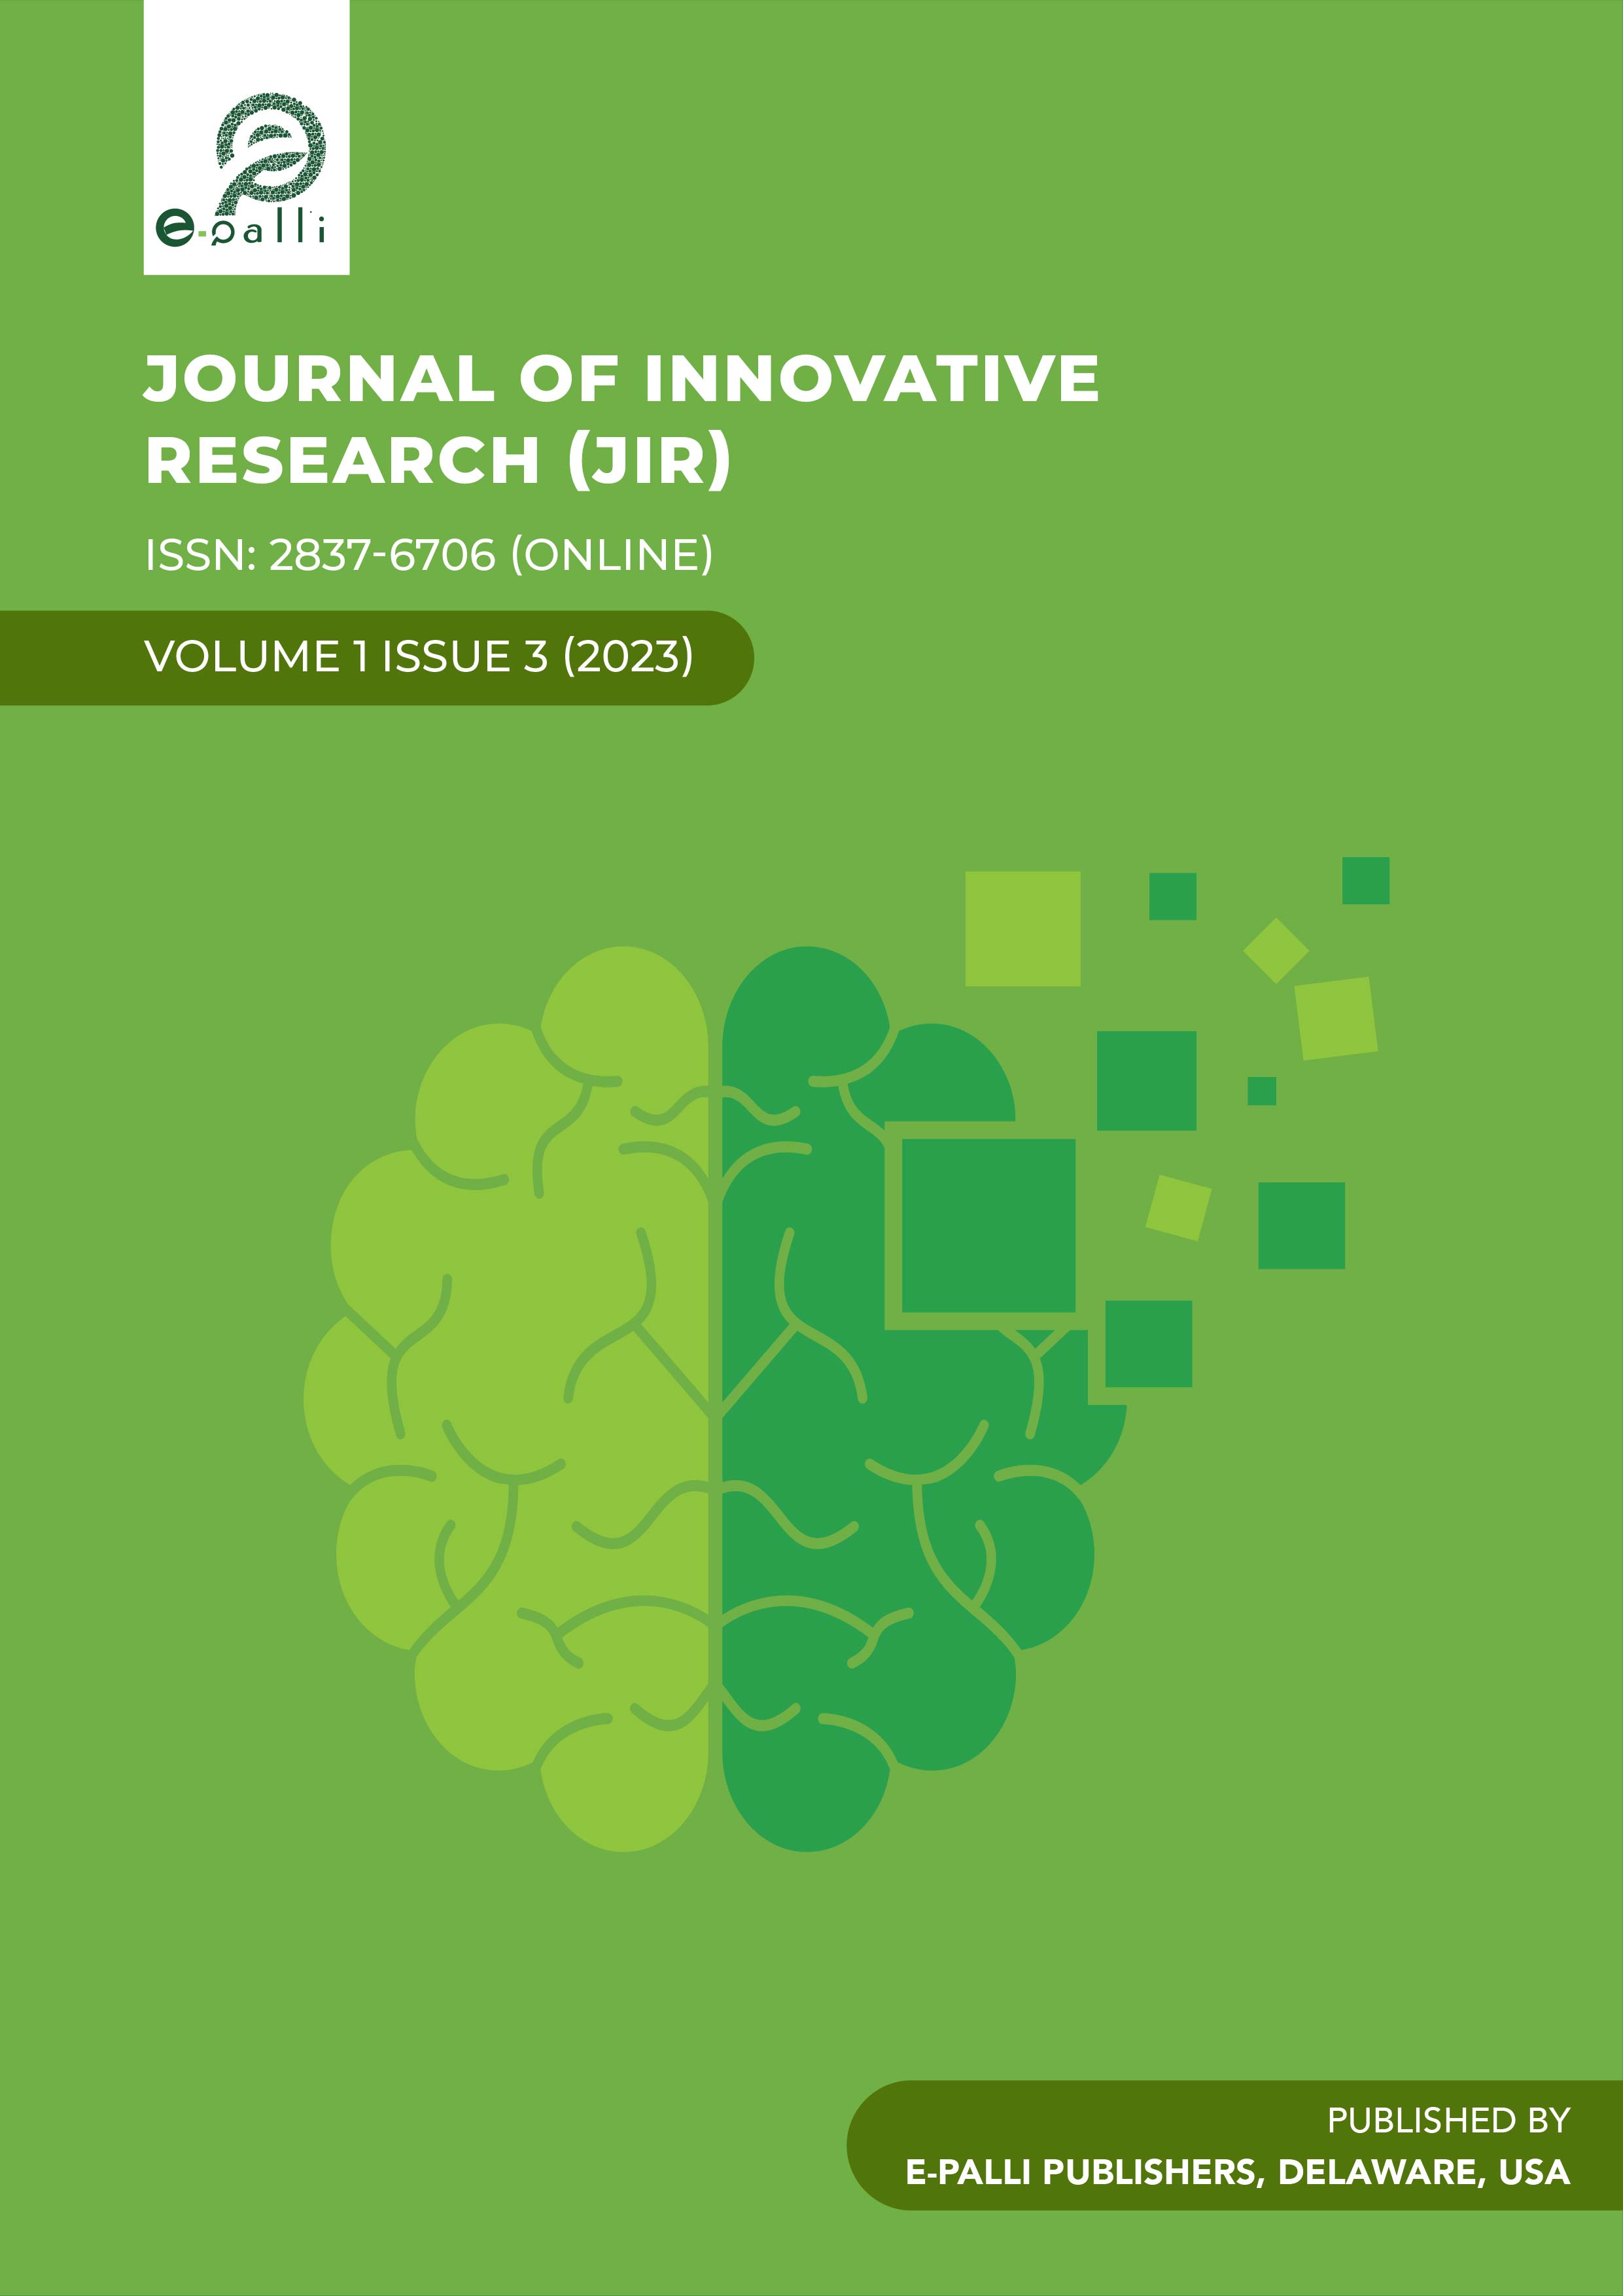 					View Vol. 1 No. 3 (2023): Journal of Innovative Research
				